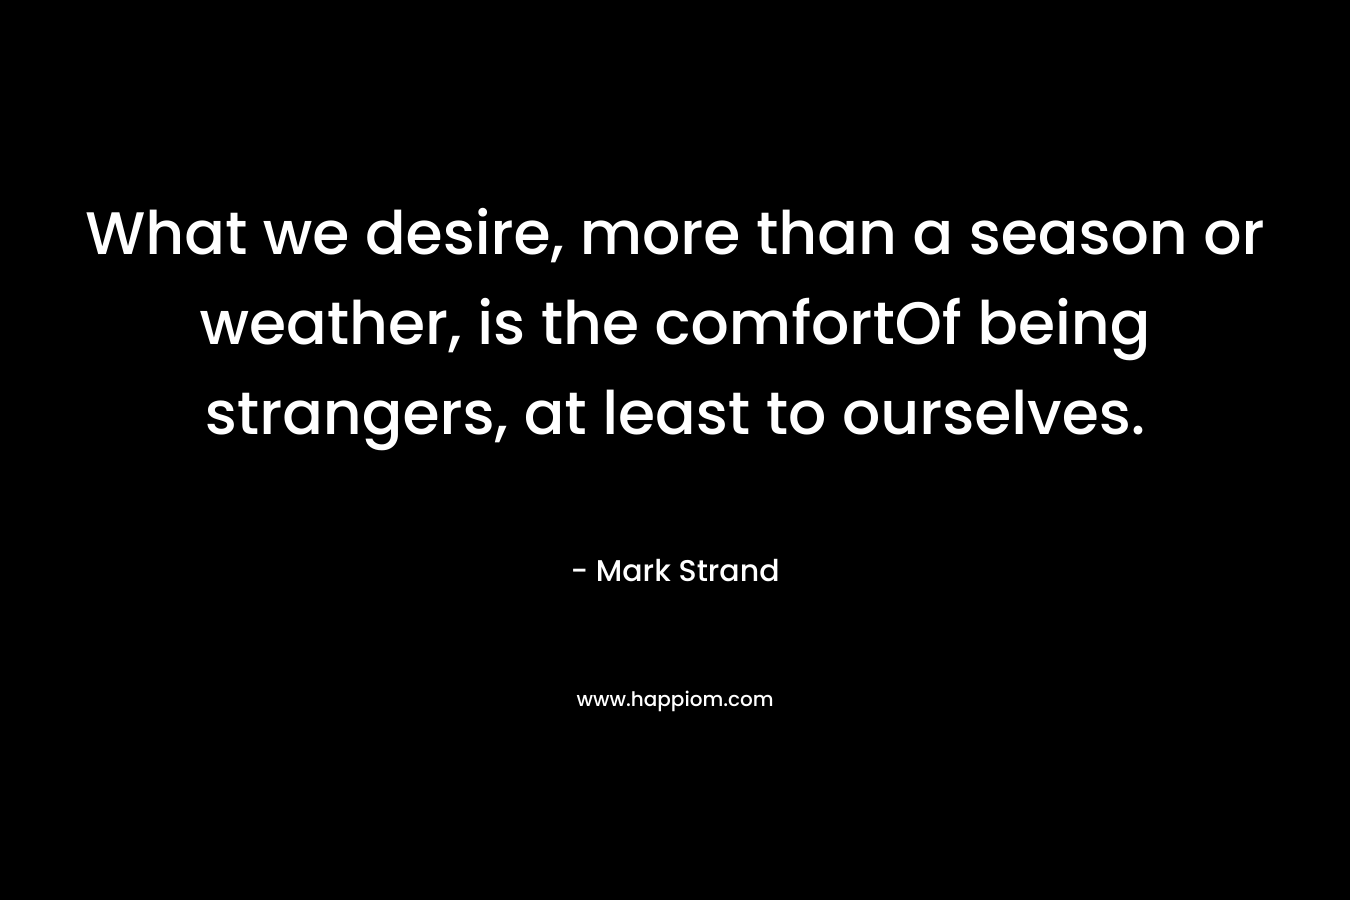 What we desire, more than a season or weather, is the comfortOf being strangers, at least to ourselves. – Mark Strand